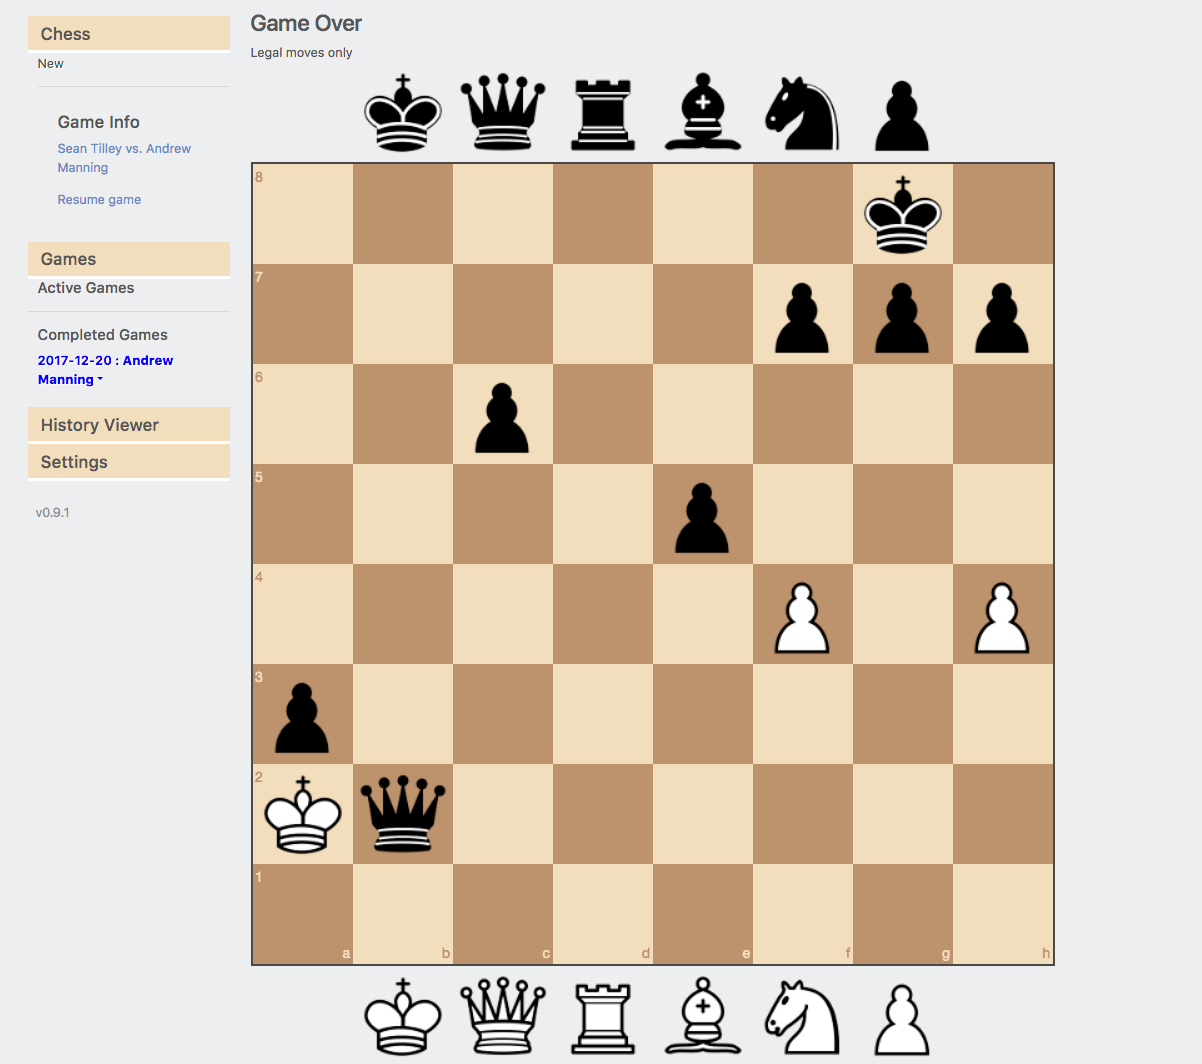 lichess: Your turn! Can you find the so… - Mastodon